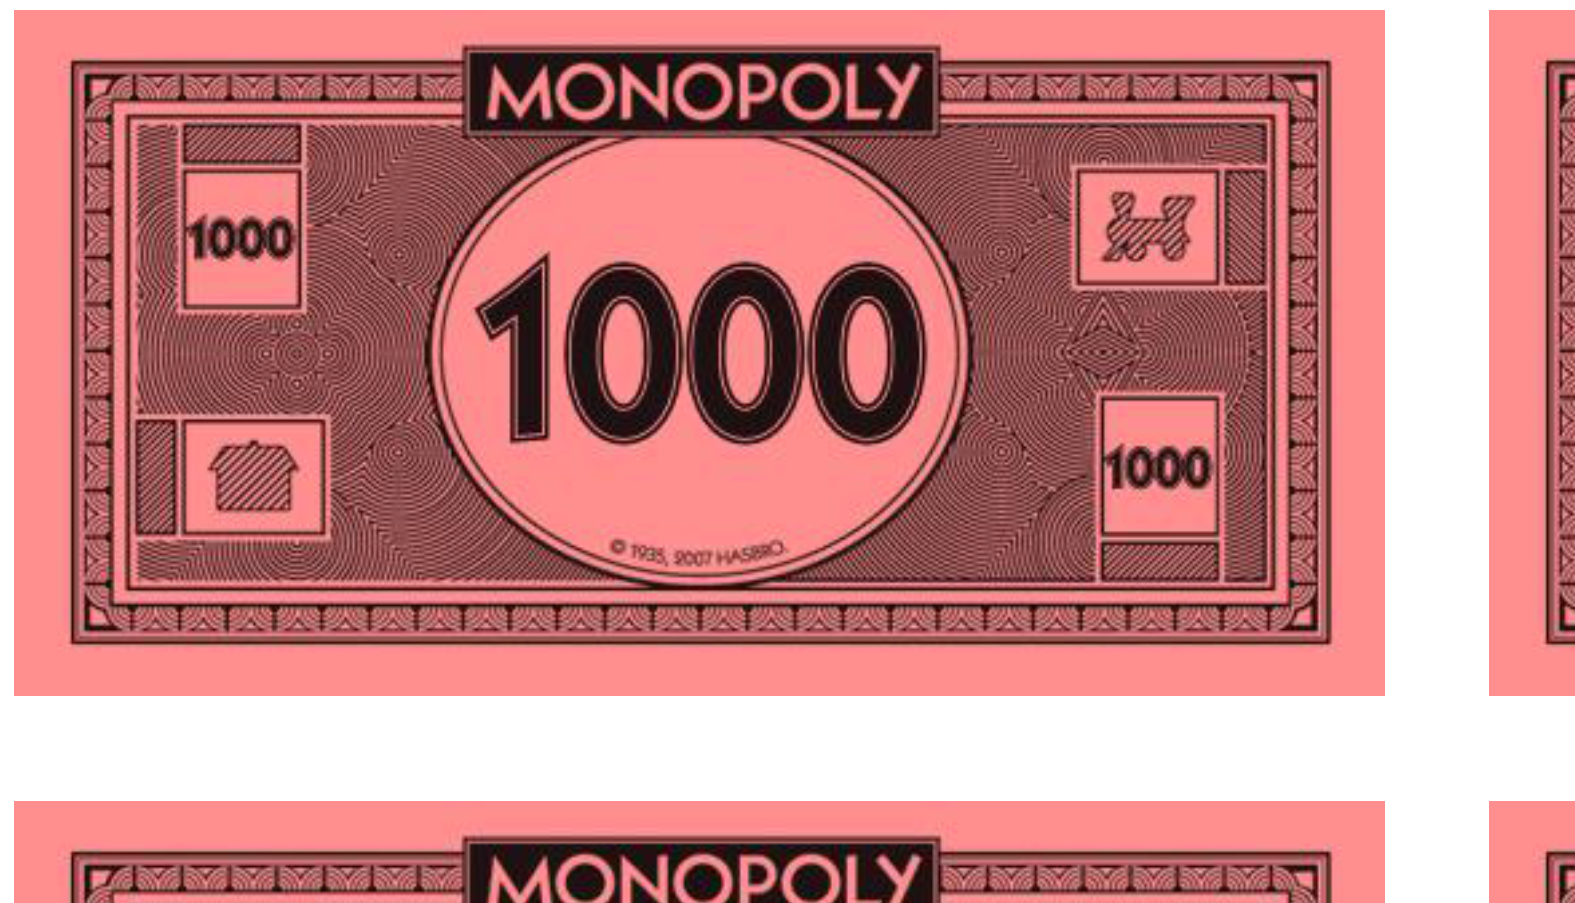 Monopoly Money 1000 Bill Templates at